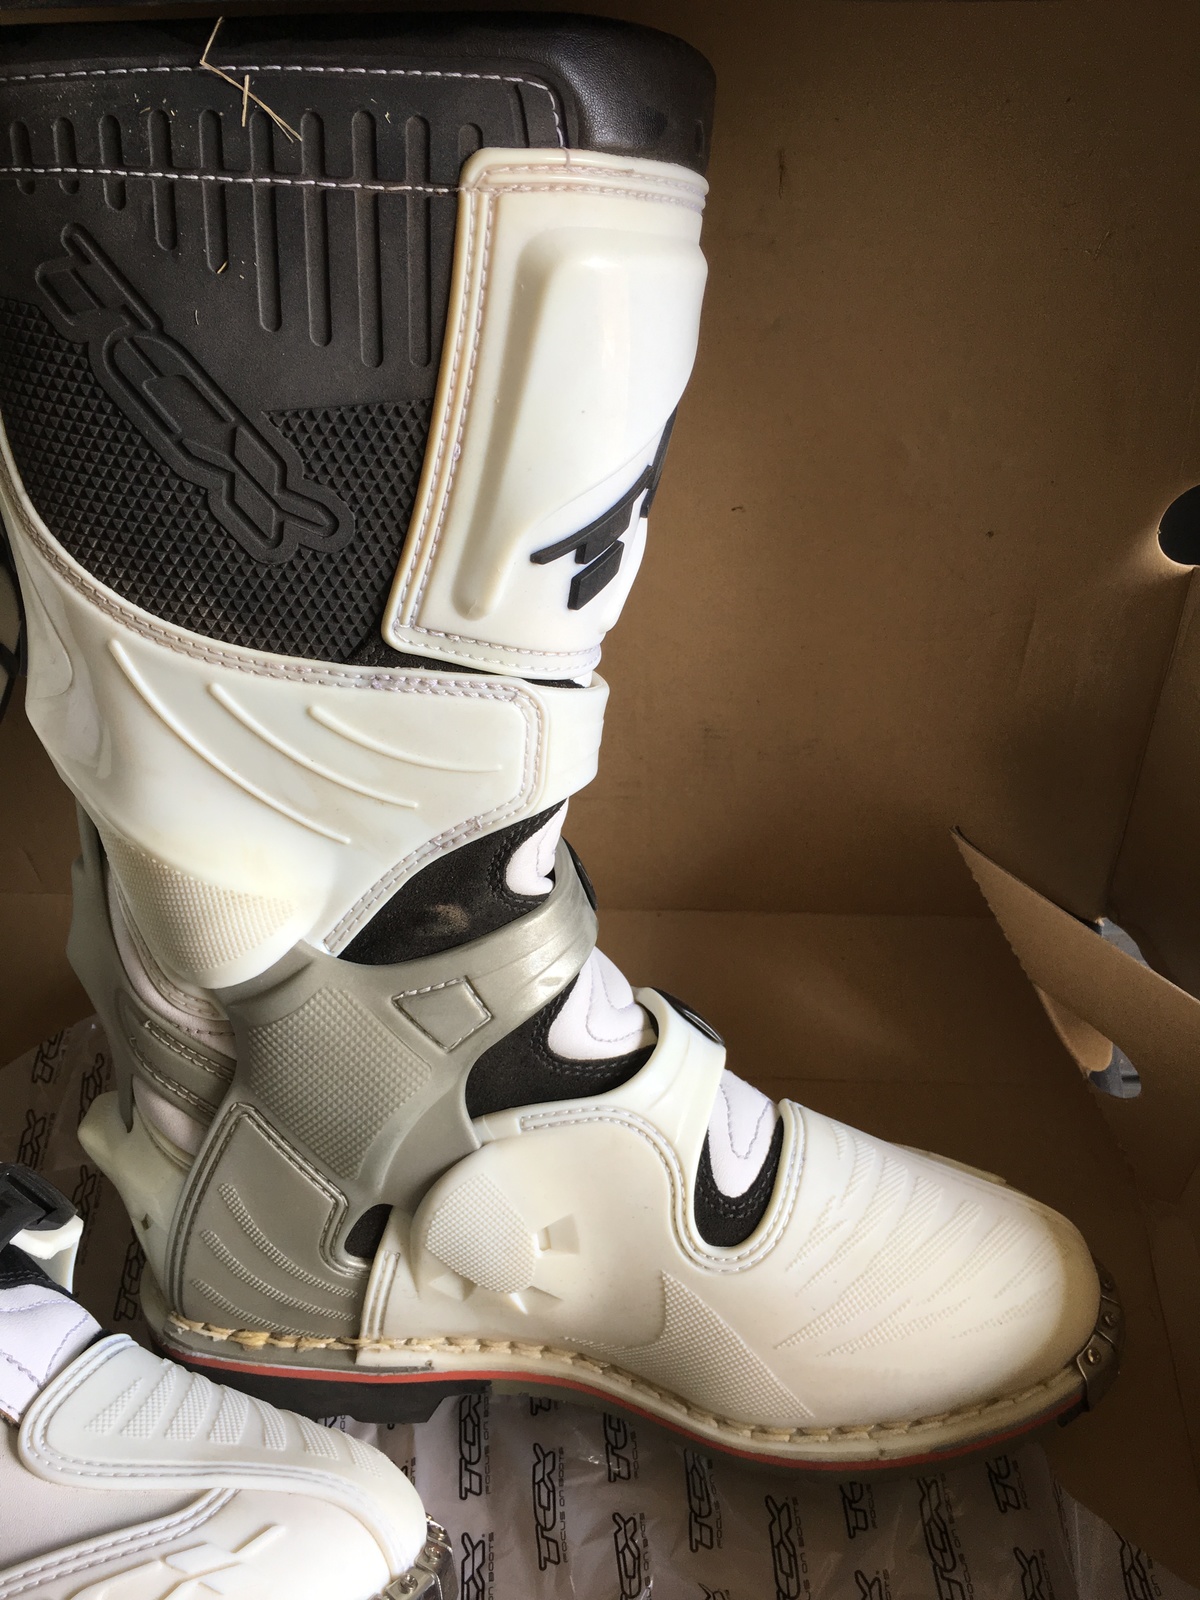 TCX COMP 2 OFF ROAD DIRT BIKE BOOTS WHITE SIZE EURO 46 US 12